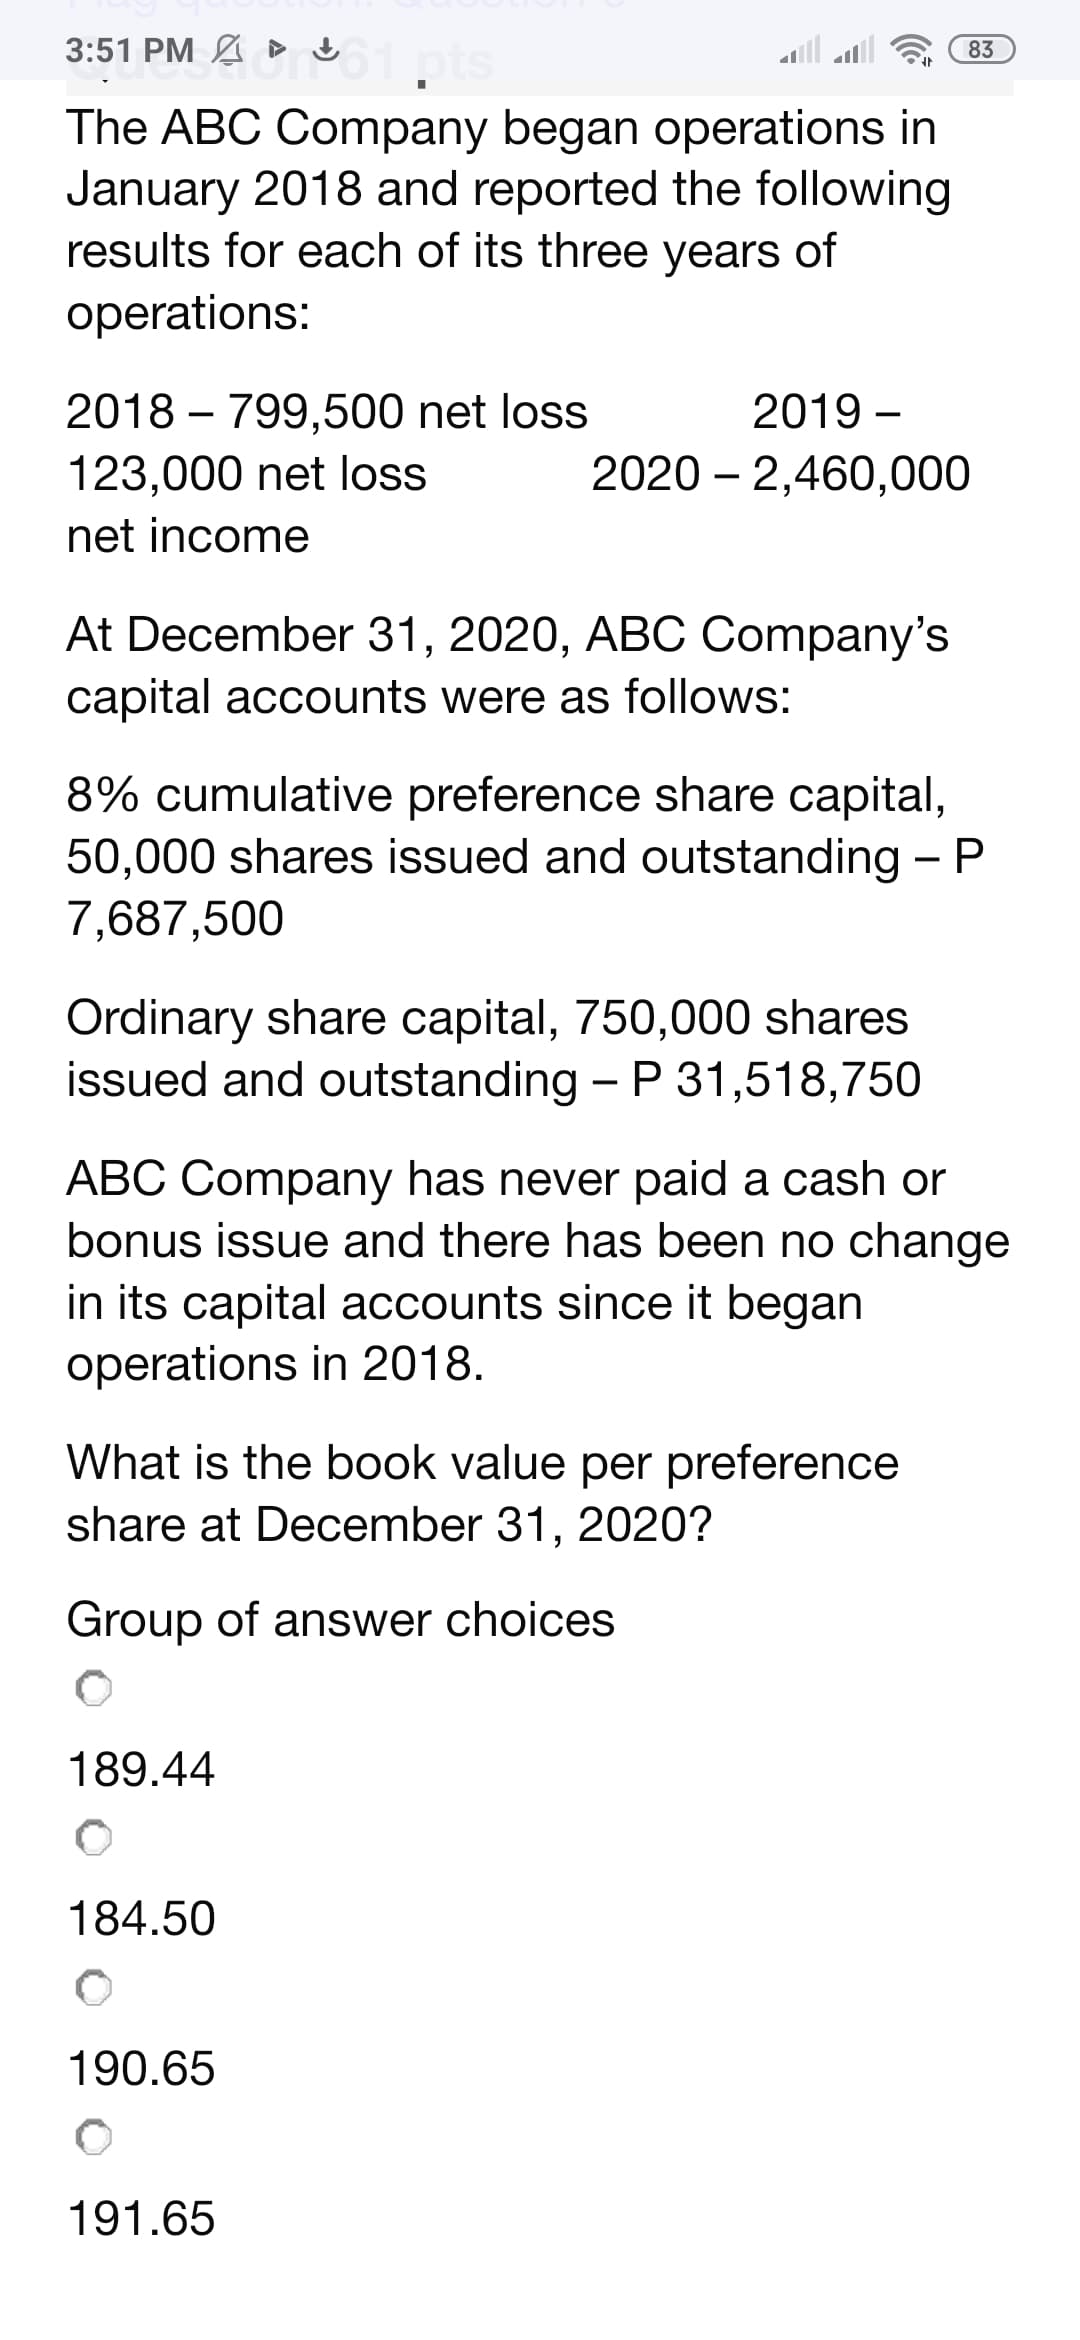 MA ▸ 61 pts
3:51 PM
The ABC Company began operations in
January 2018 and reported the following
results for each of its three years of
operations:
2018 - 799,500 net loss
123,000 net loss
net income
At December 31, 2020, ABC Company's
capital accounts were as follows:
8% cumulative preference share capital,
50,000 shares issued and outstanding - P
7,687,500
Ordinary share capital, 750,000 shares
issued and outstanding - P 31,518,750
2019-
20202,460,000
ABC Company has never paid a cash or
bonus issue and there has been no change
in its capital accounts since it began
operations in 2018.
What is the book value per preference
share at December 31, 2020?
Group of answer choices
189.44
83
184.50
O
190.65
191.65